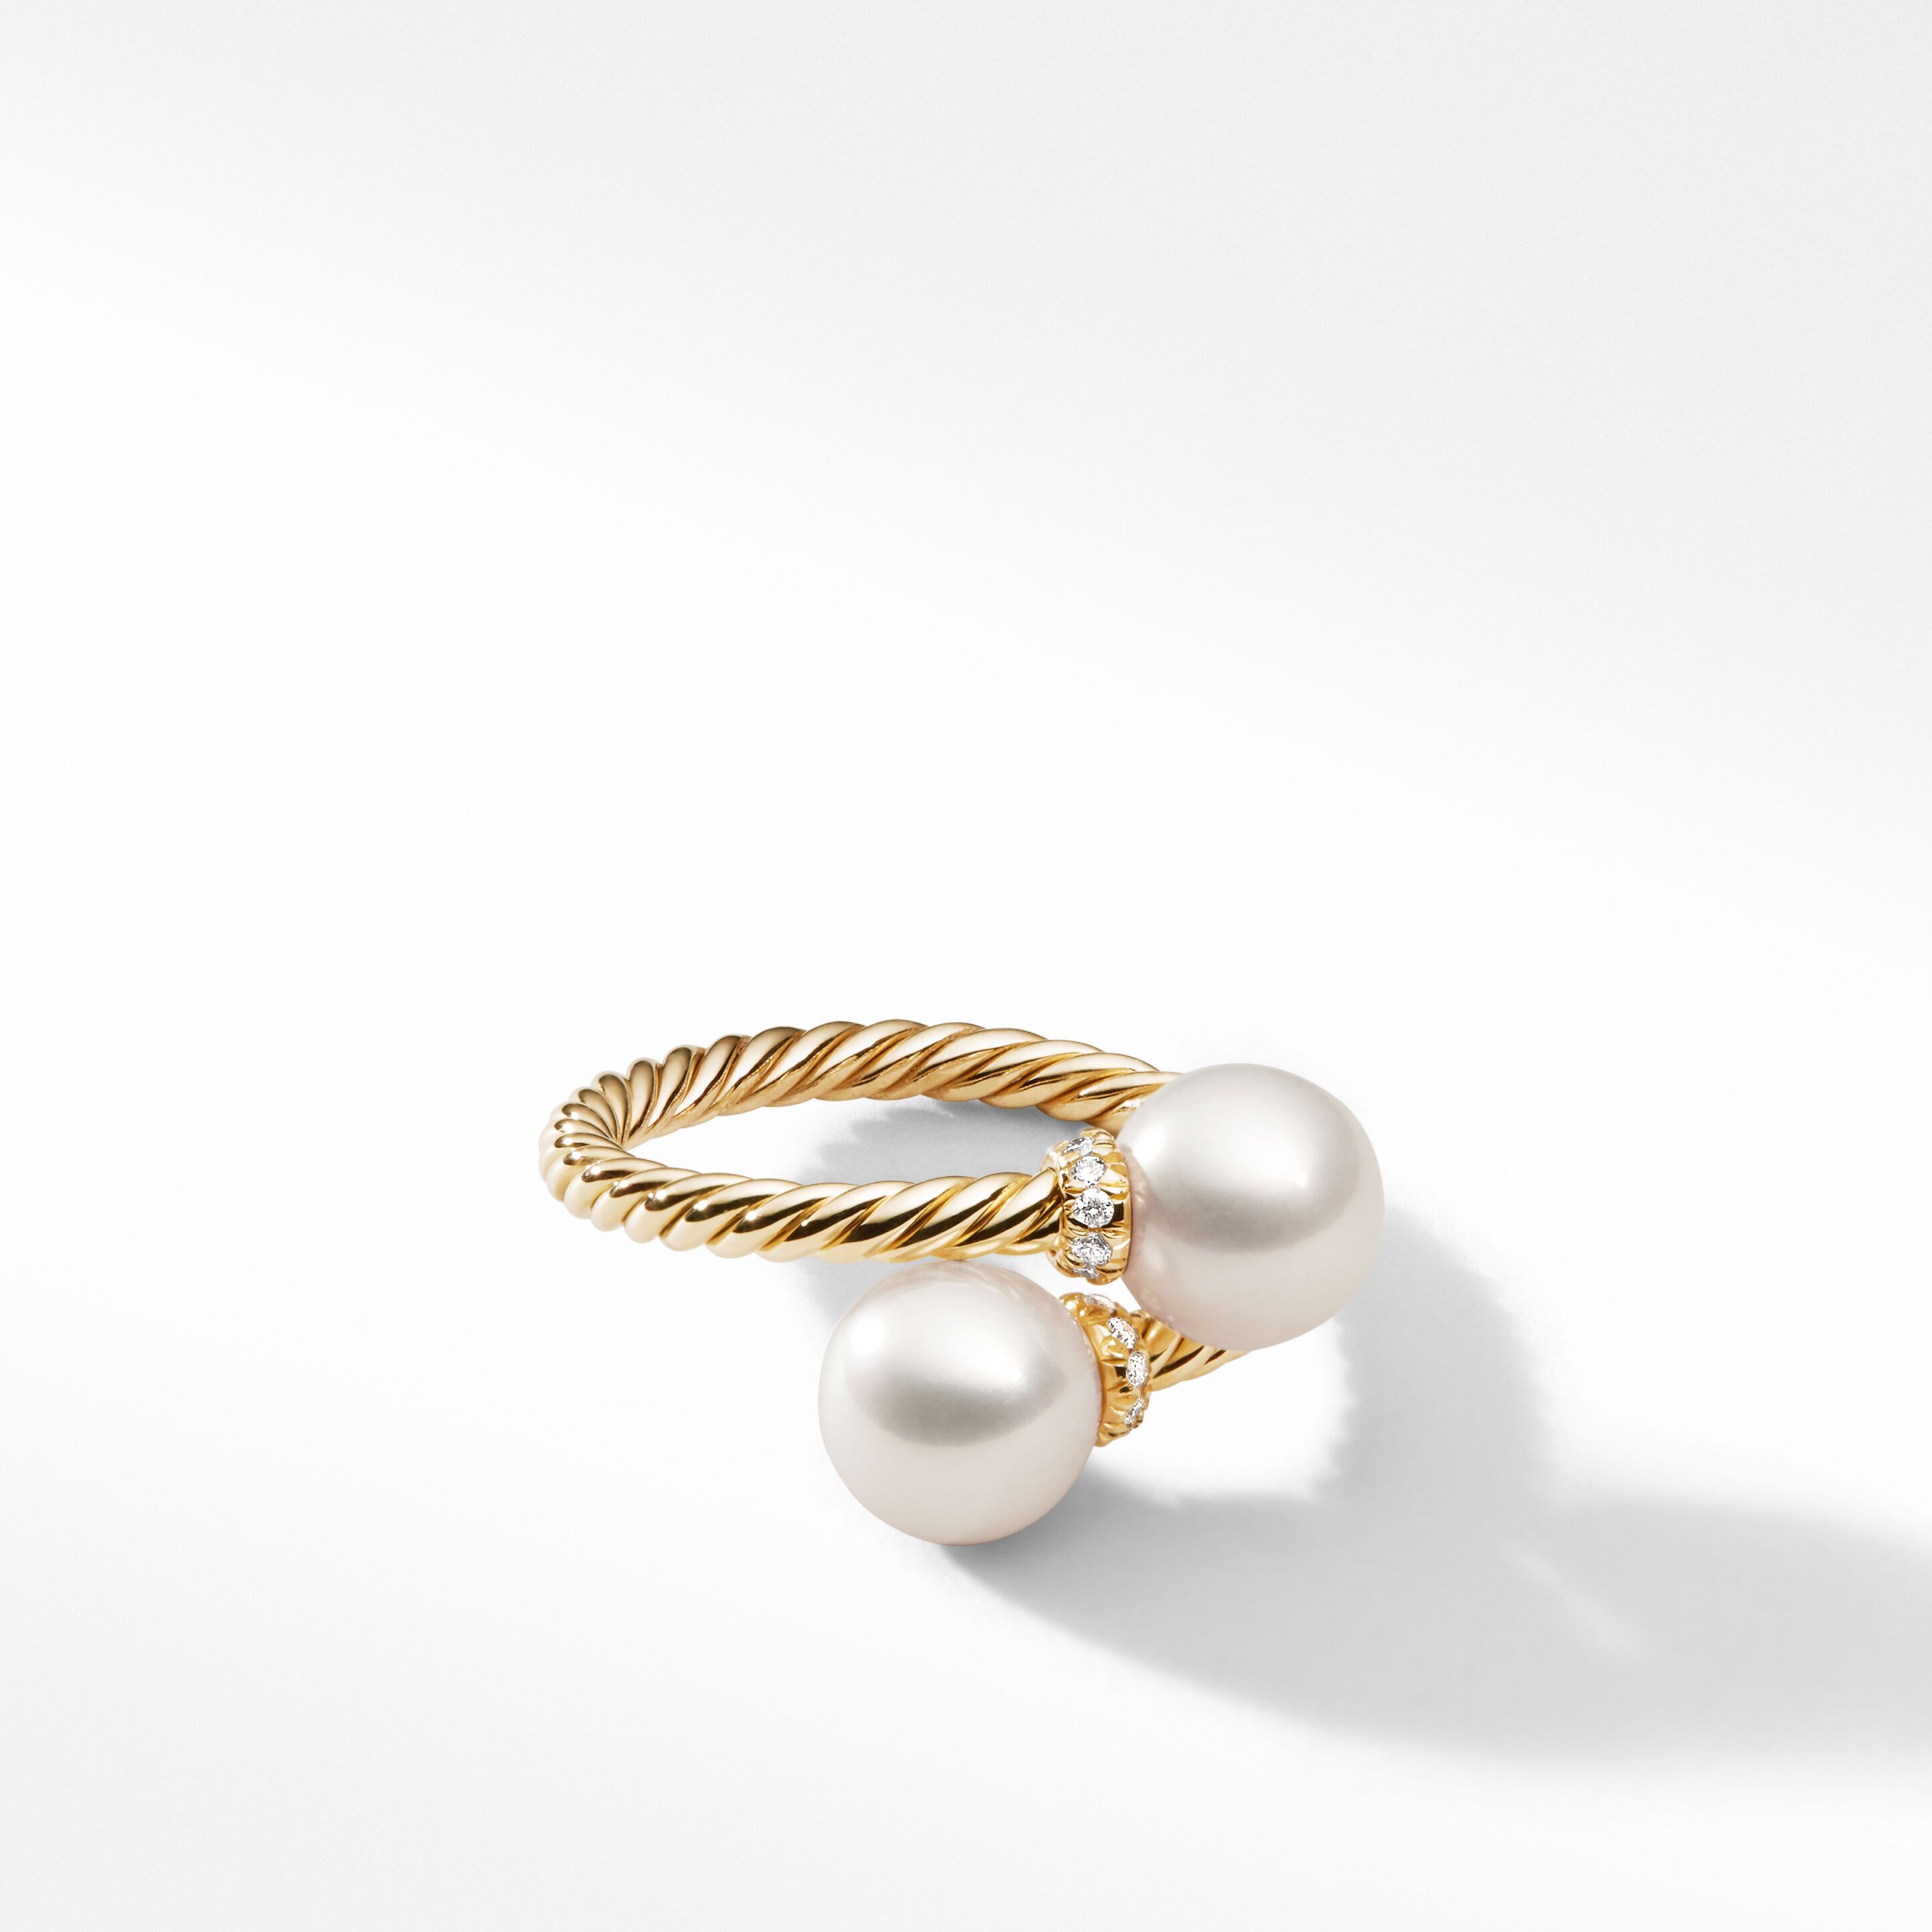 Solari Bypass Ring in 18K Yellow Gold with Pearls and Pavé Diamonds | David Yurman